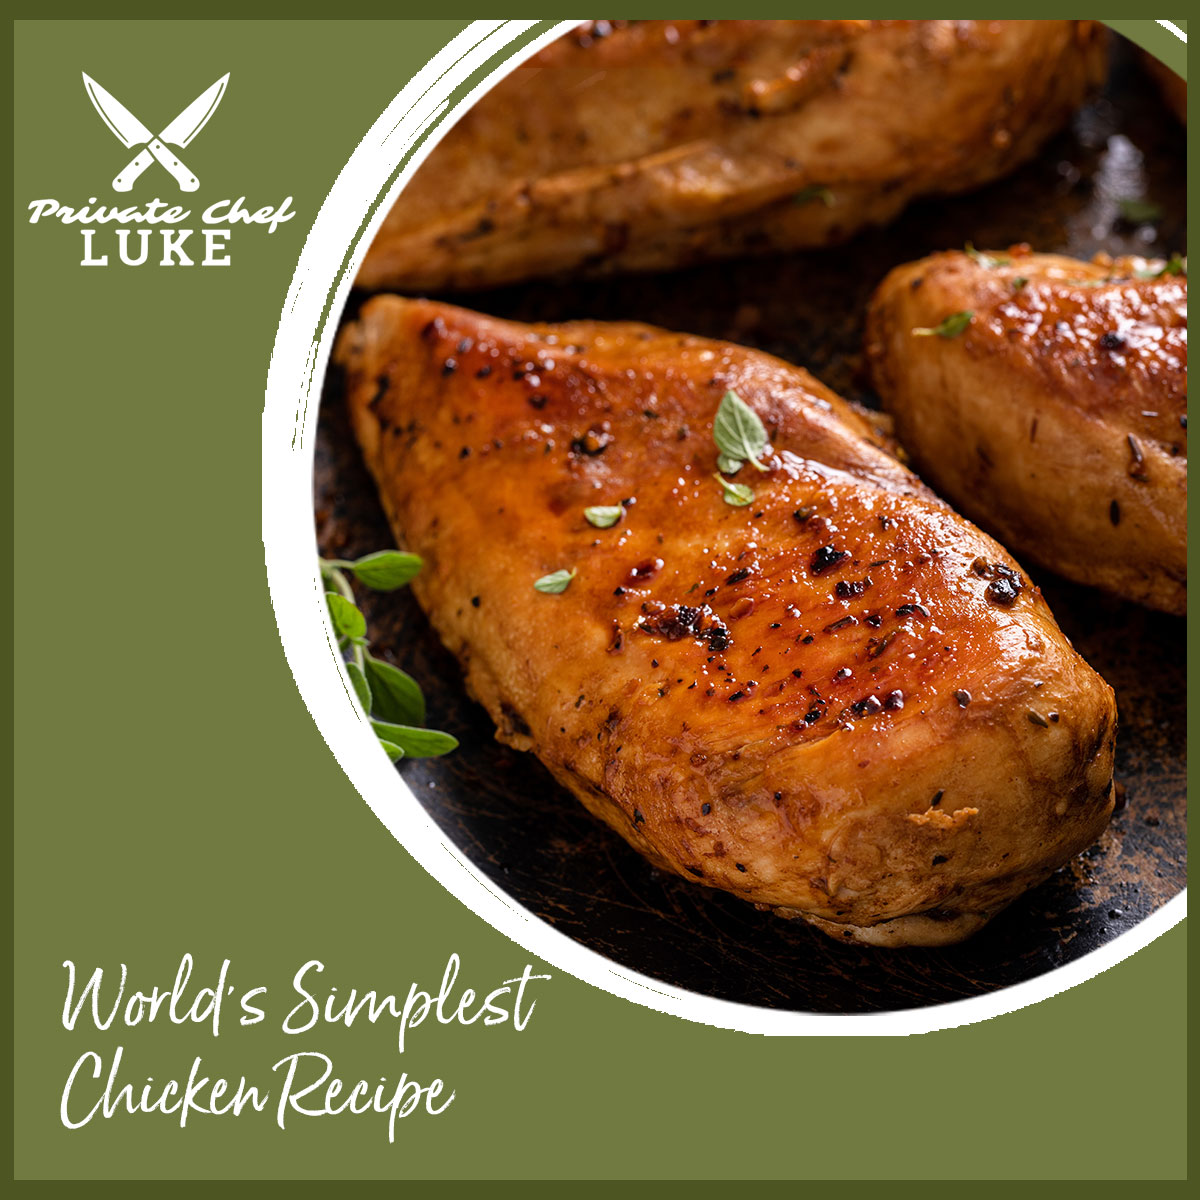 Download the Recipe for Chef Luke's World's Simplest Chicken.